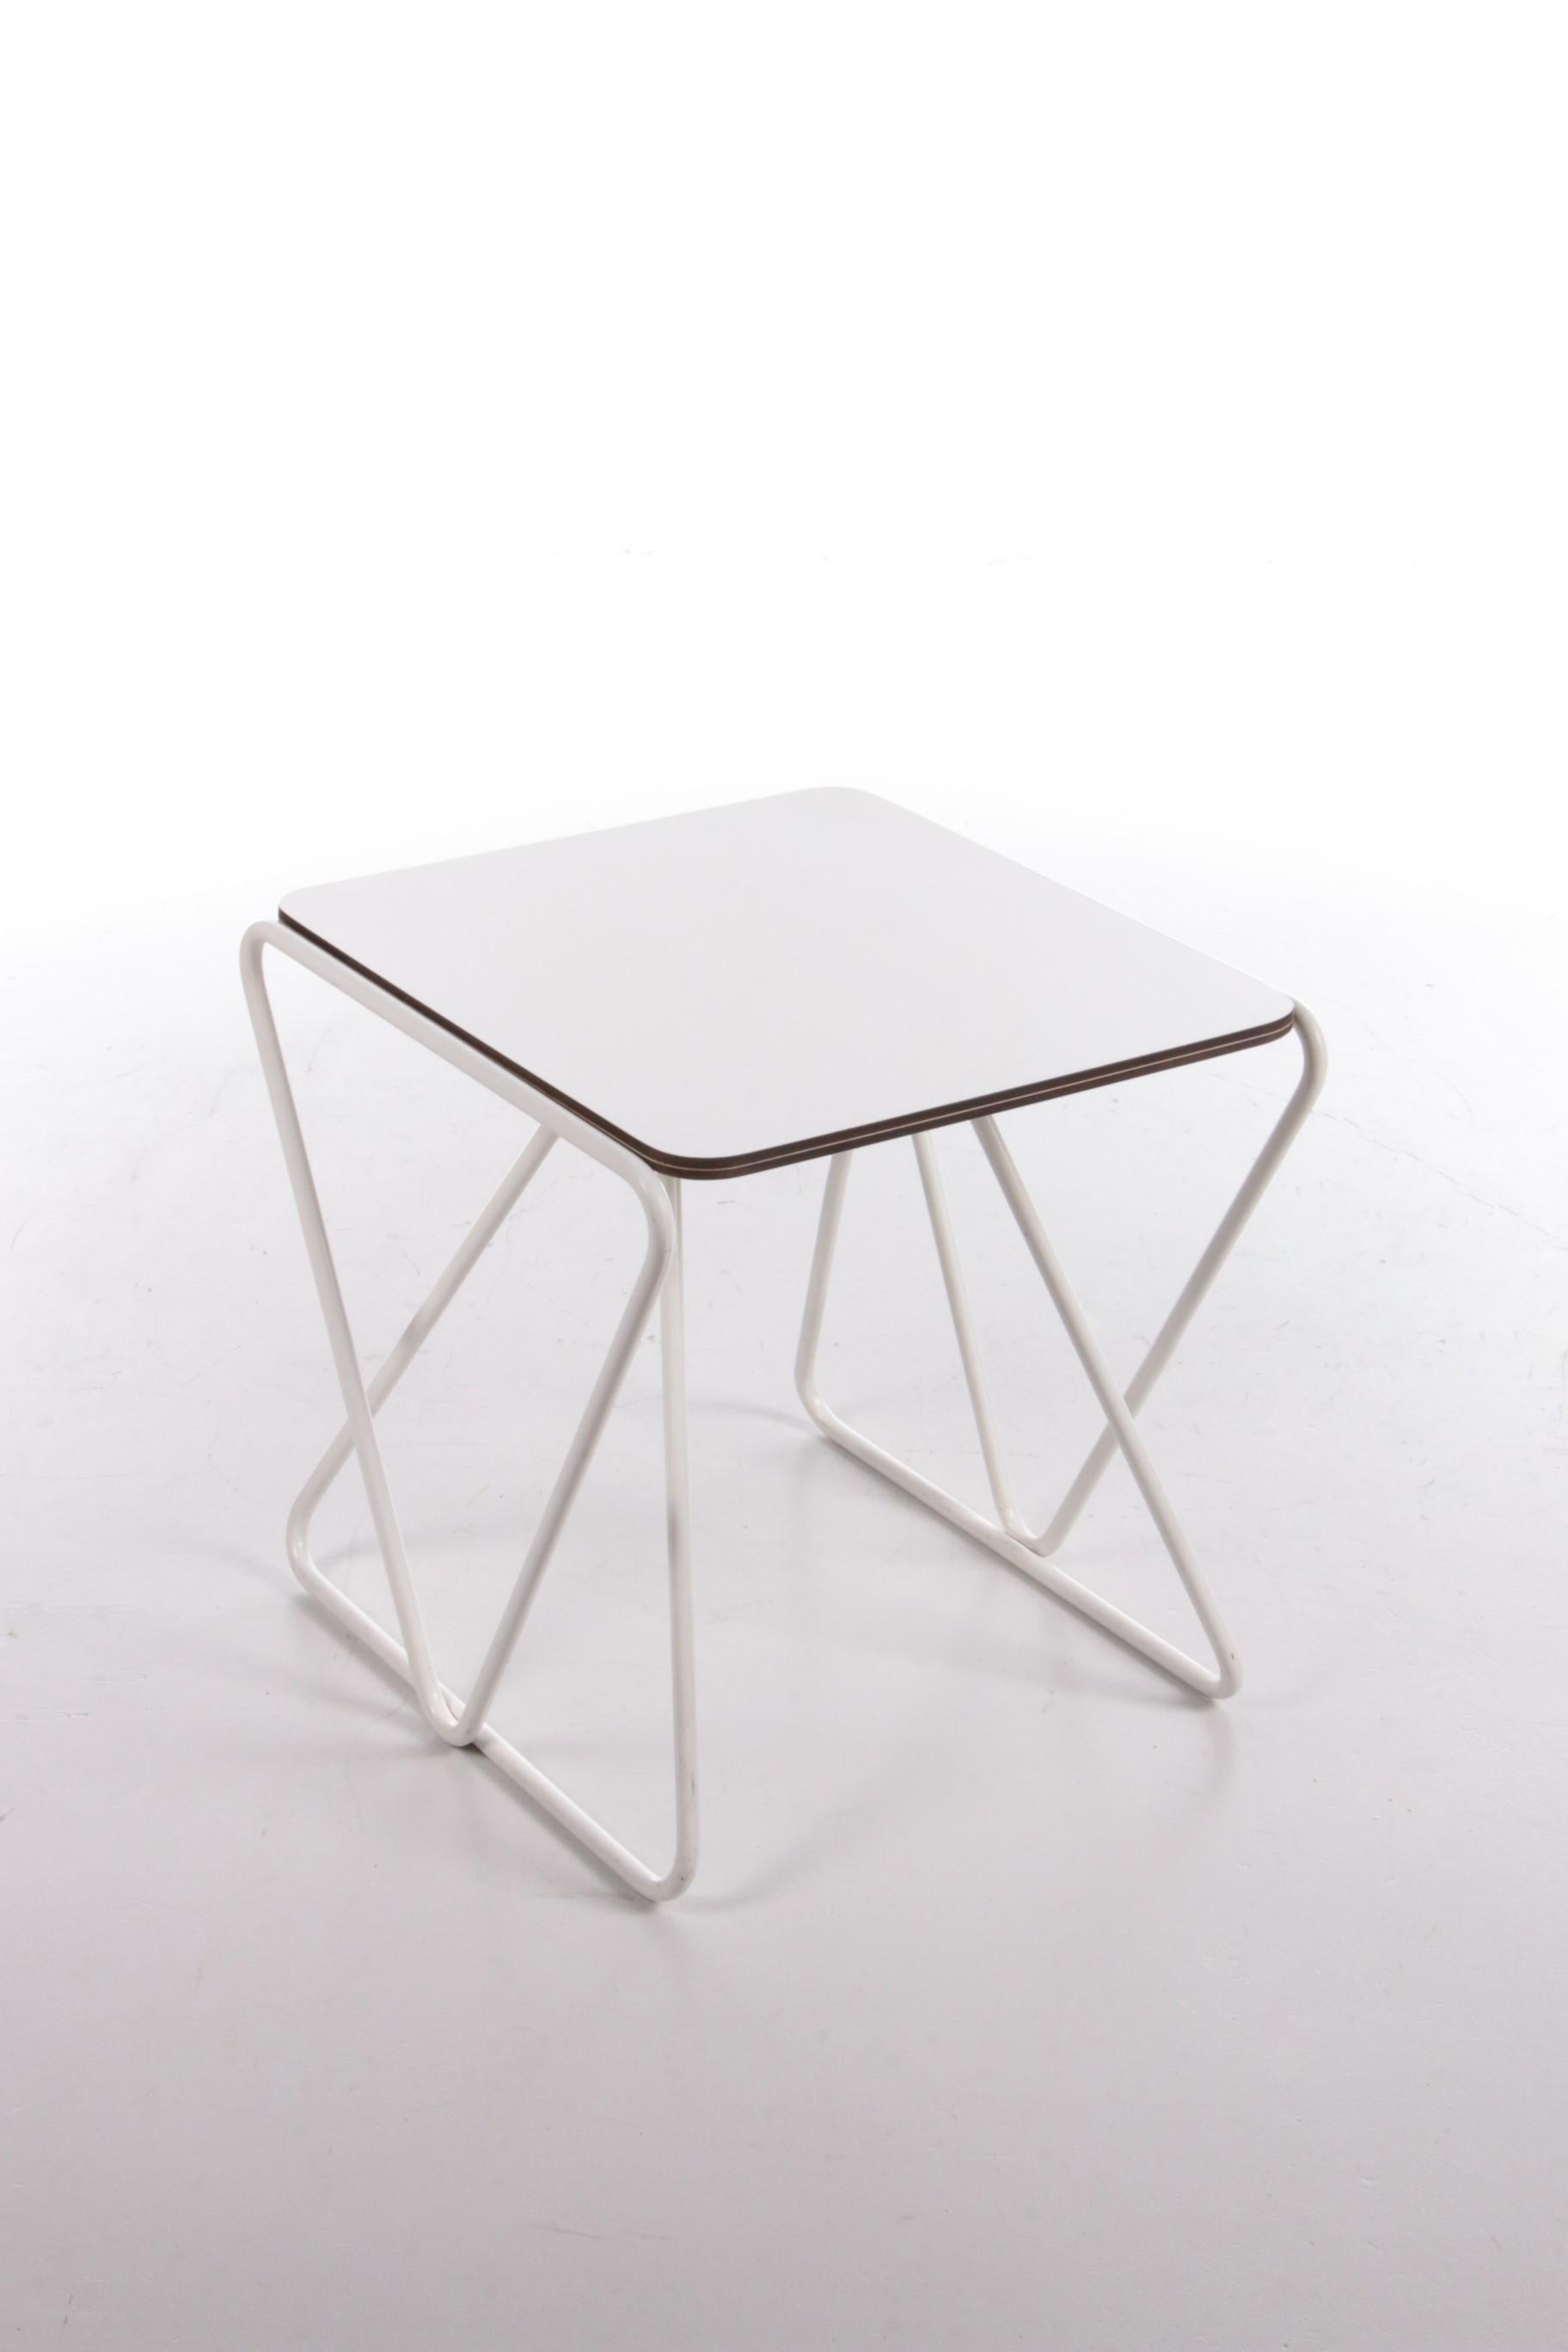 Modern Walter Antonis Side Table for I-Form Holland, 1978 For Sale